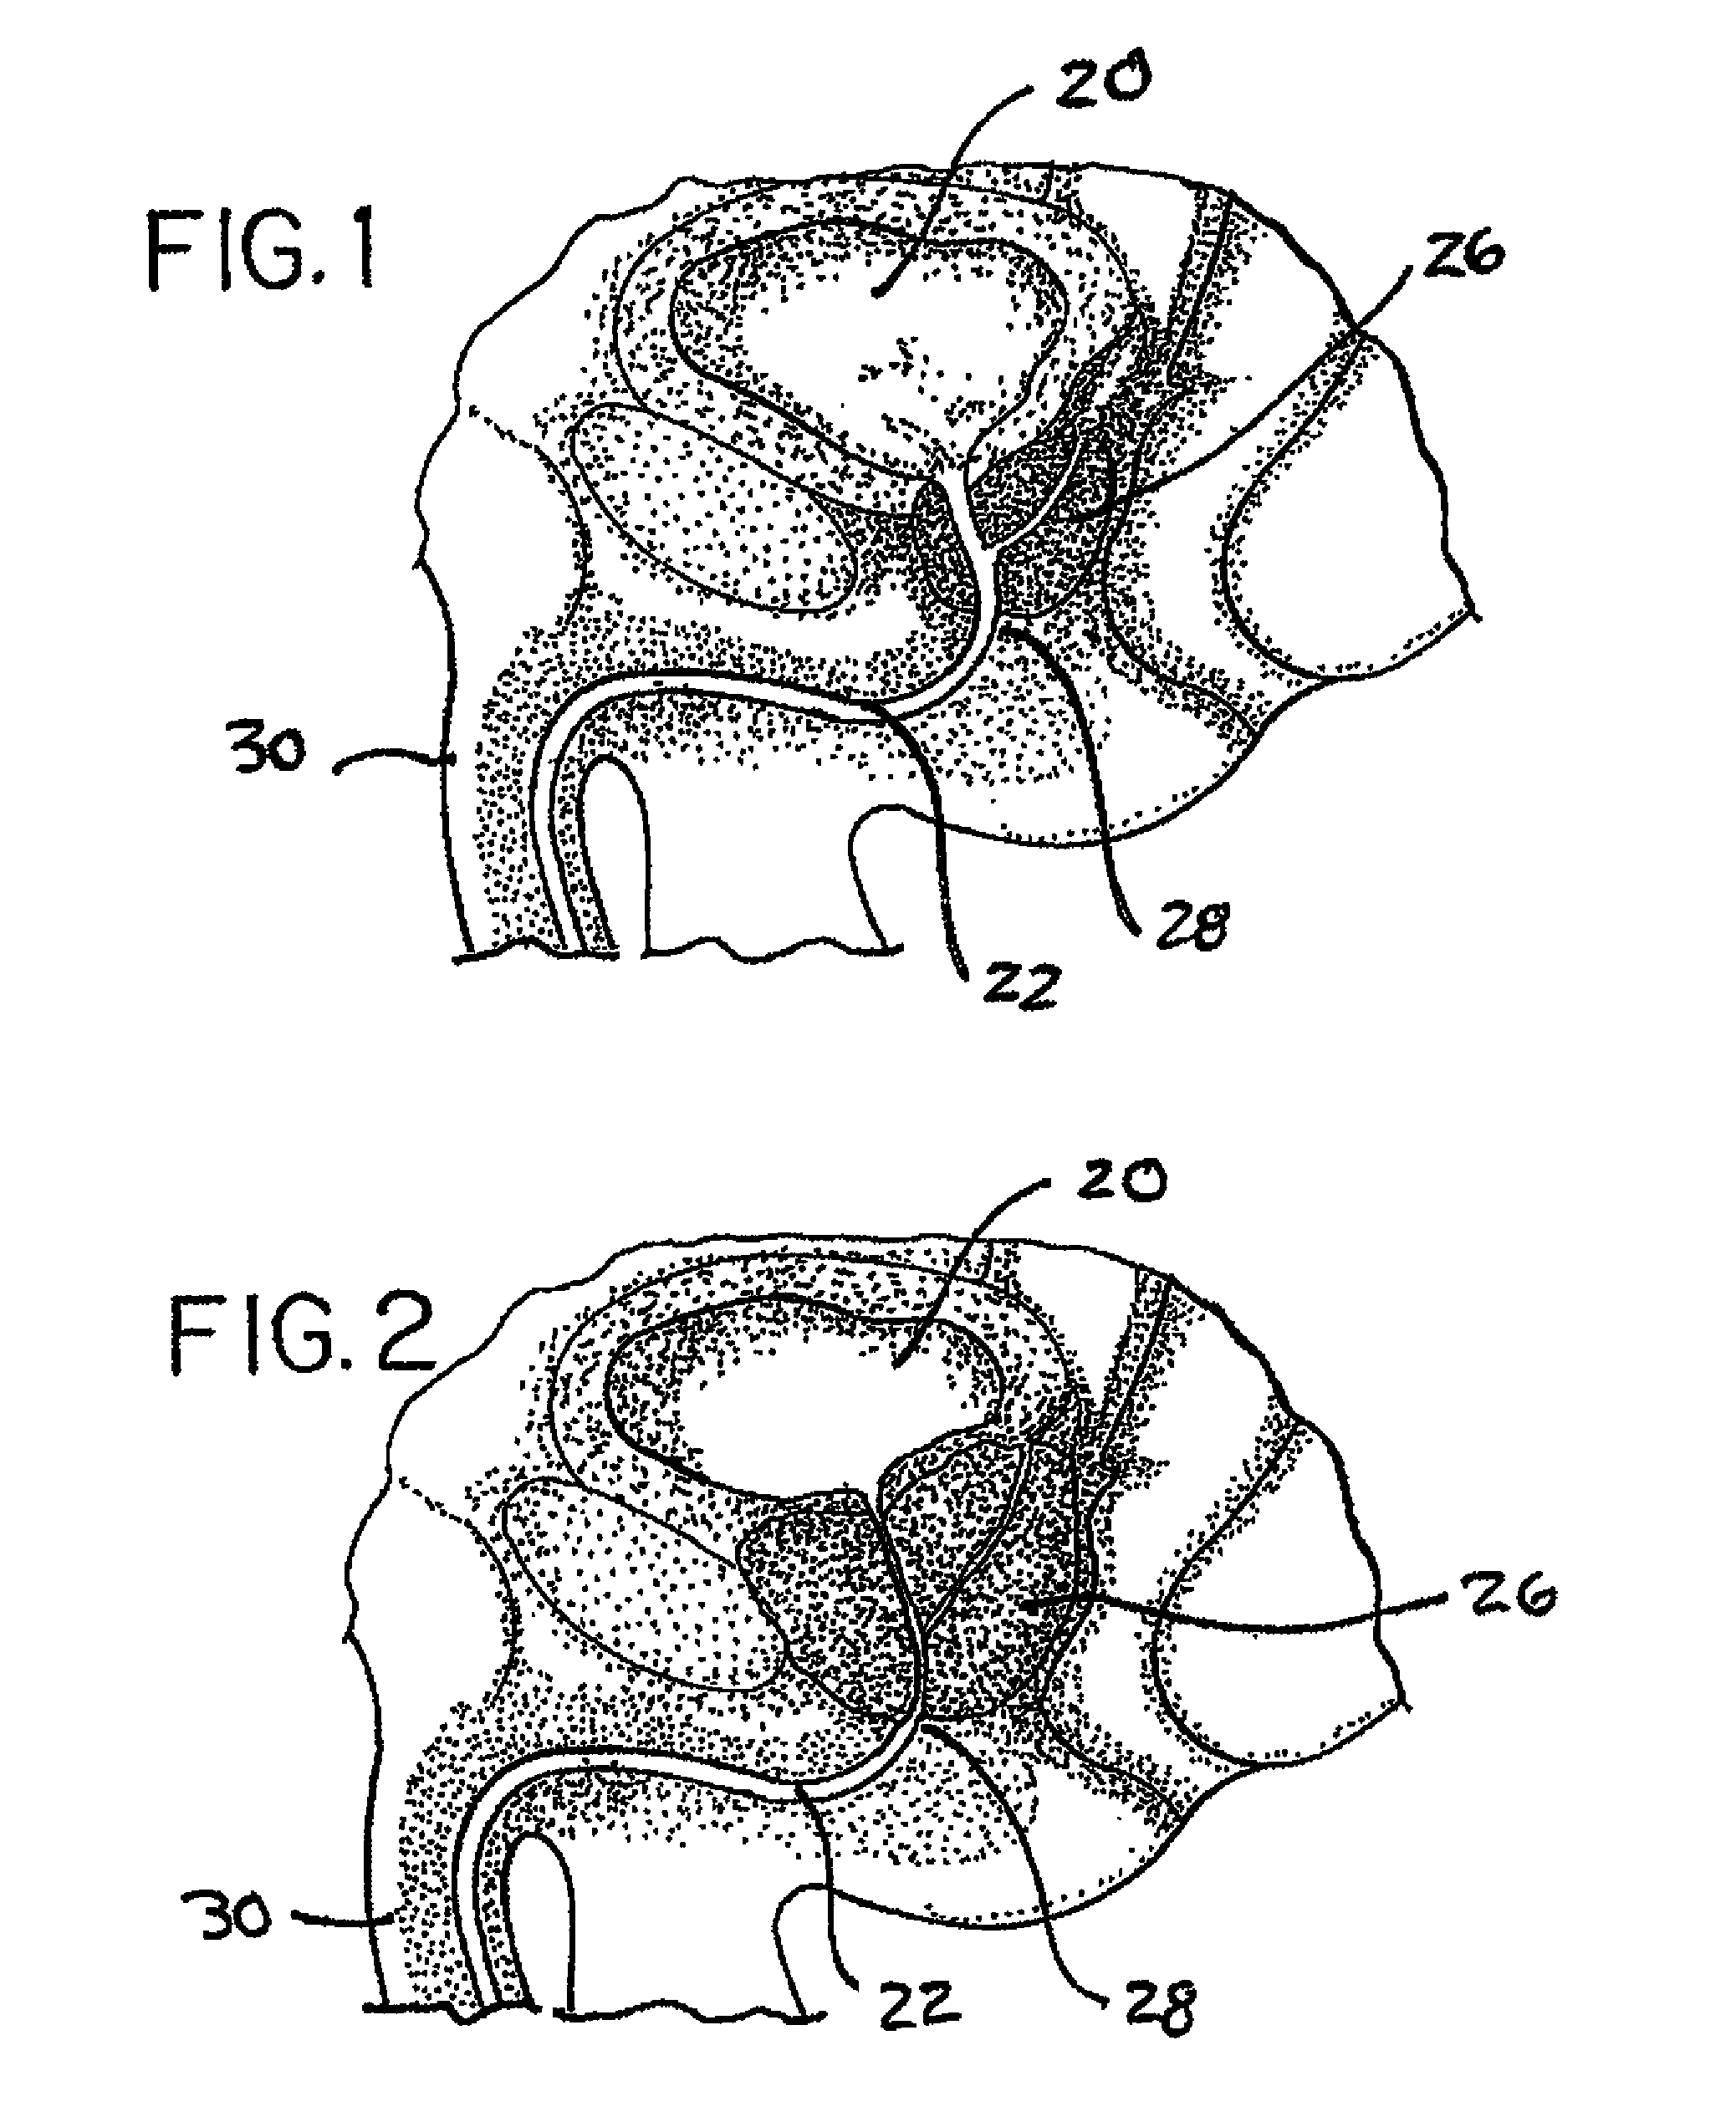 Method and apparatus for remodeling/profiling a tissue lumen, particularly in the urethral lumen in the prostate gland